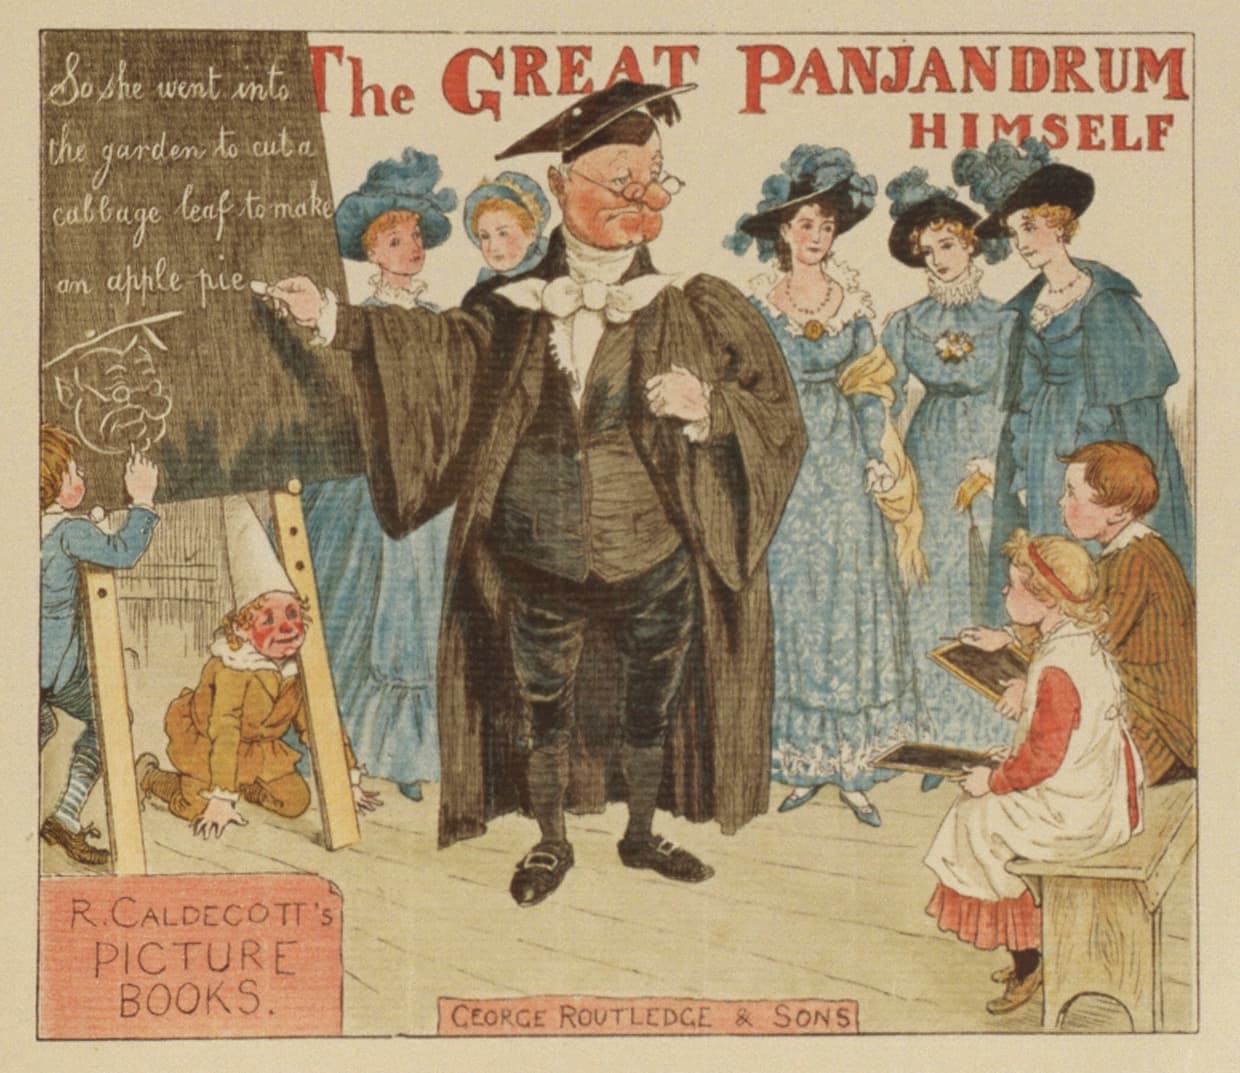 Front cover of The Great Panjandrum Himself (page 475 of The Complete Collection of PICTURES and SONGS)